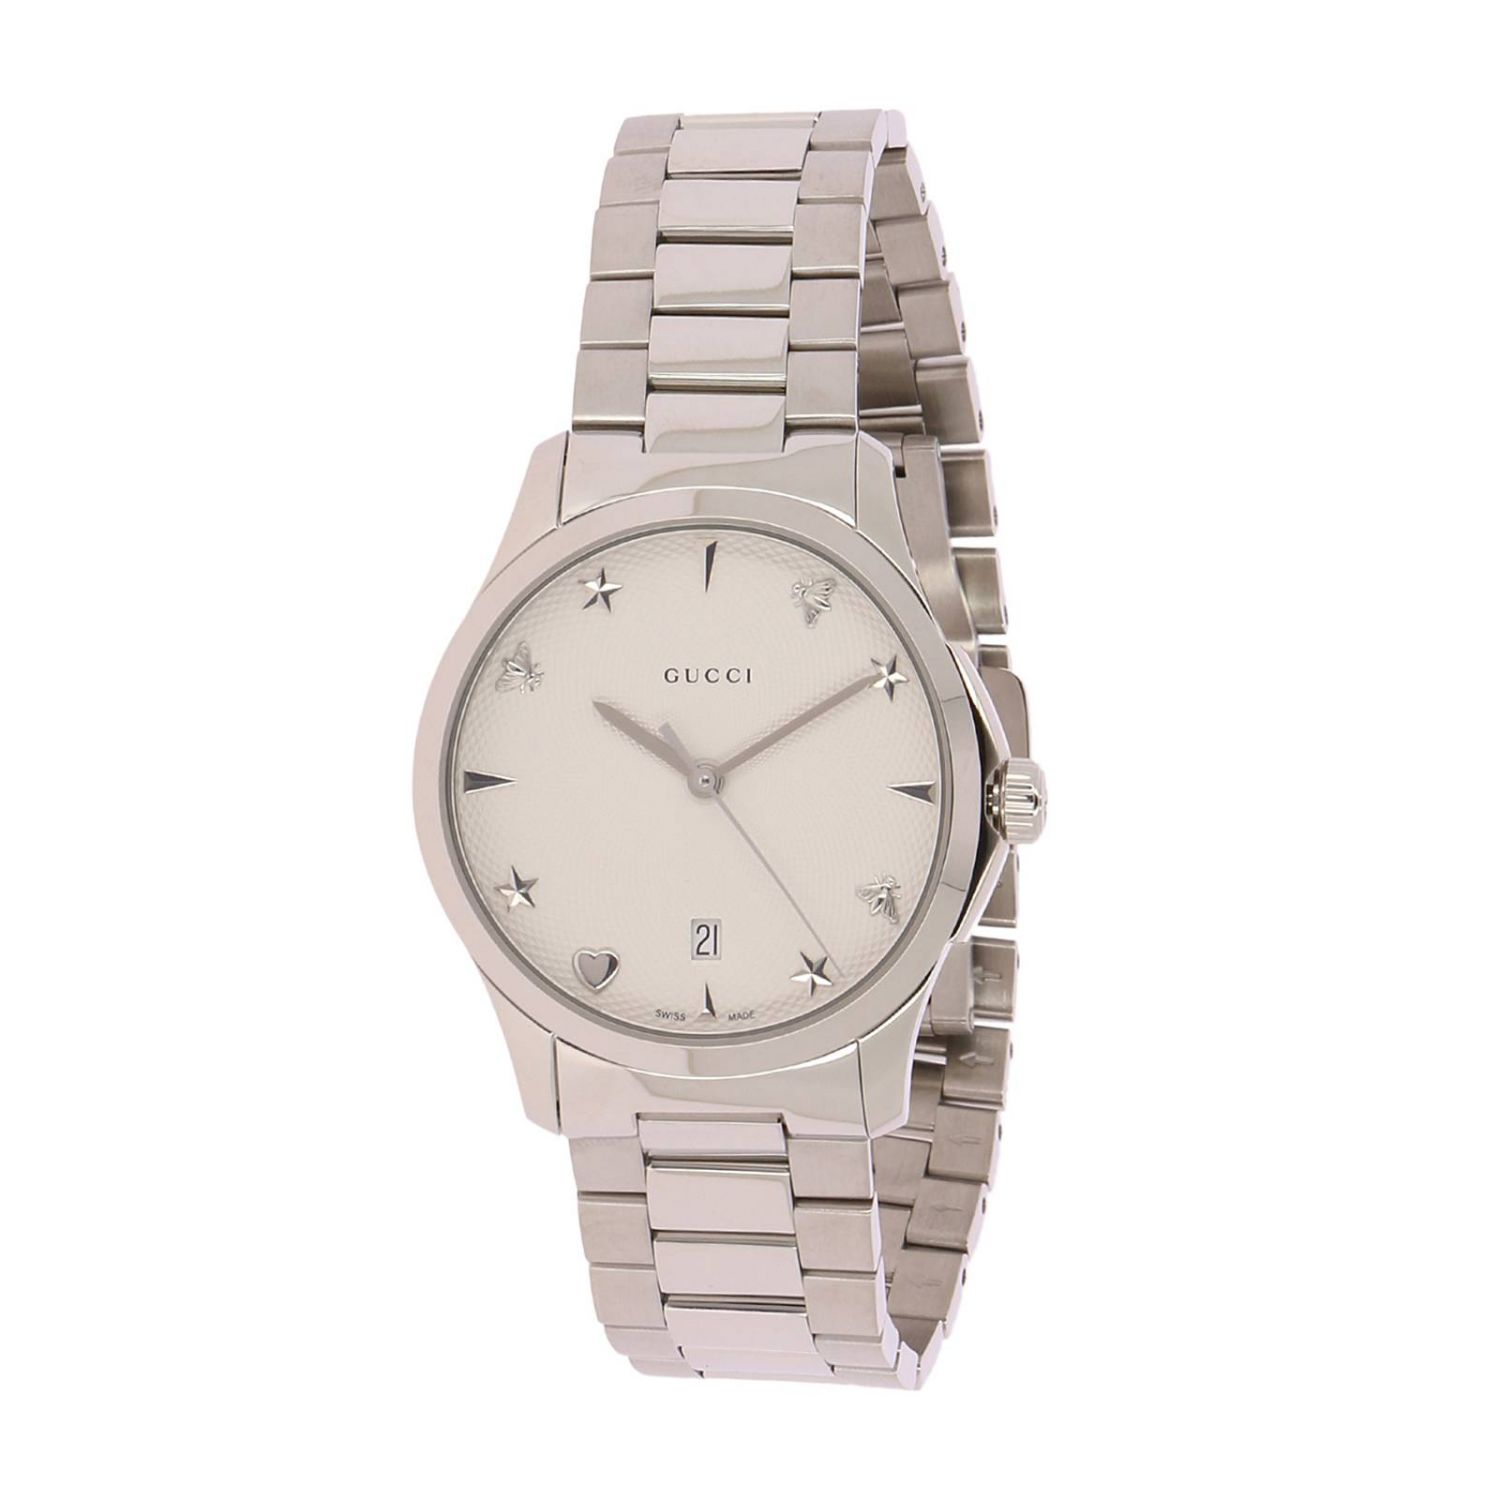 Vend tilbage Bølle Defekt GUCCI: G-Timeless watch 38 mm case with monogram/floral pattern | Watch  Gucci Women Silver | Watch Gucci YA1264028 GIGLIO.COM